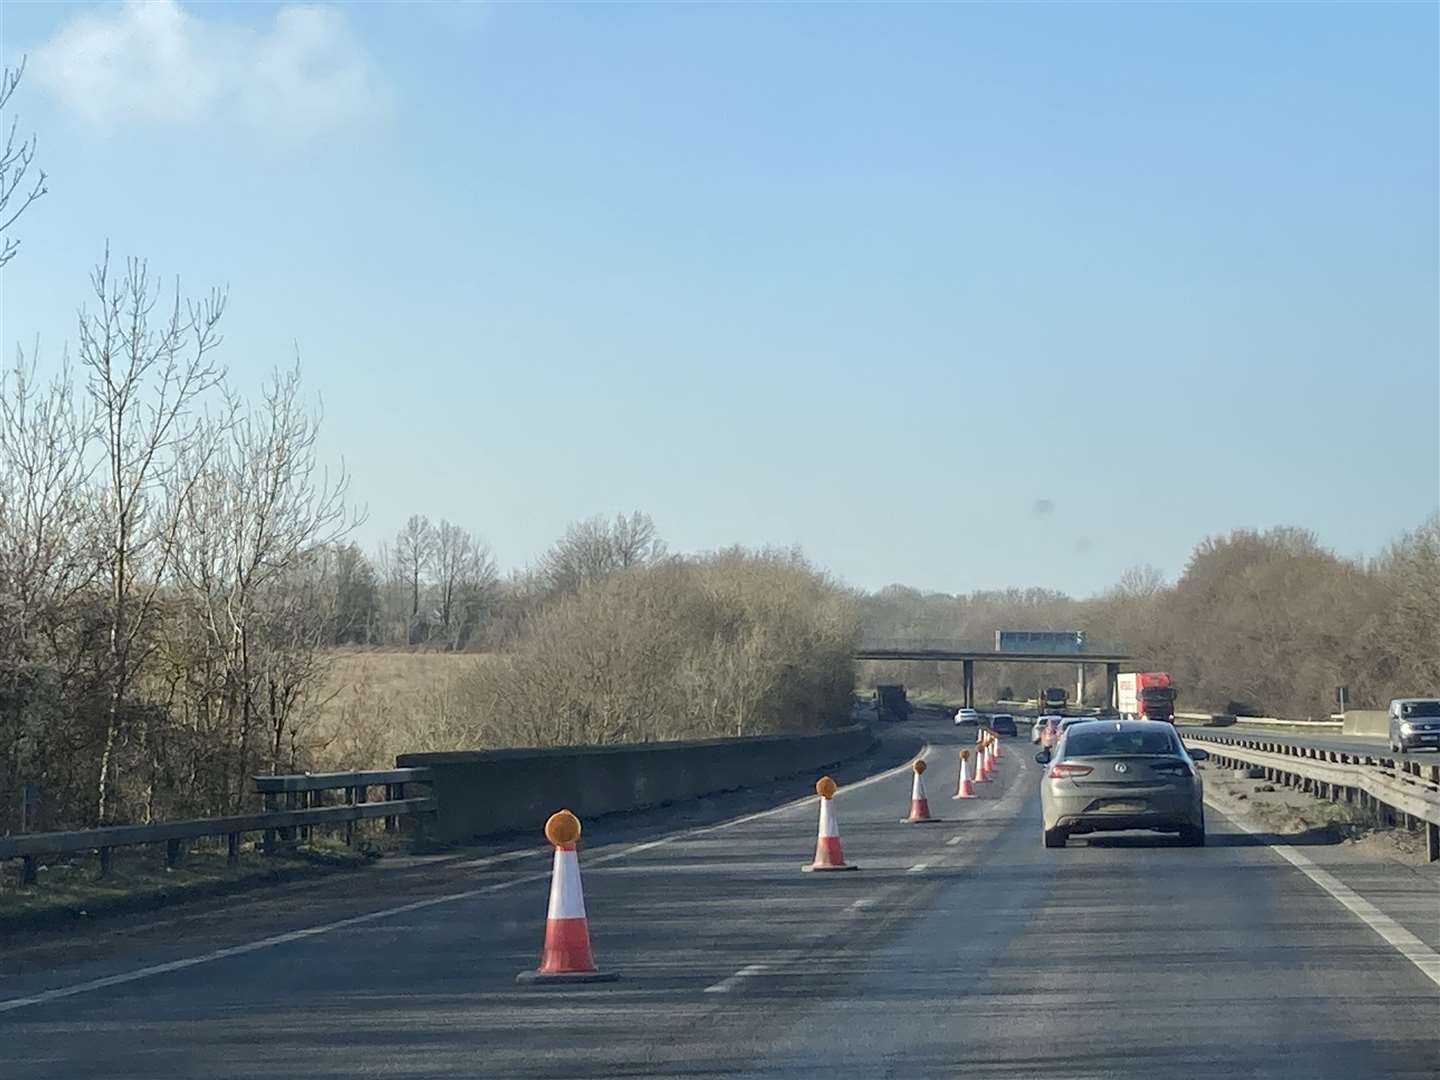 Inside lane of the London-bound carriageway of the M2 between Sittingbourne and Gillingham junctions coned off